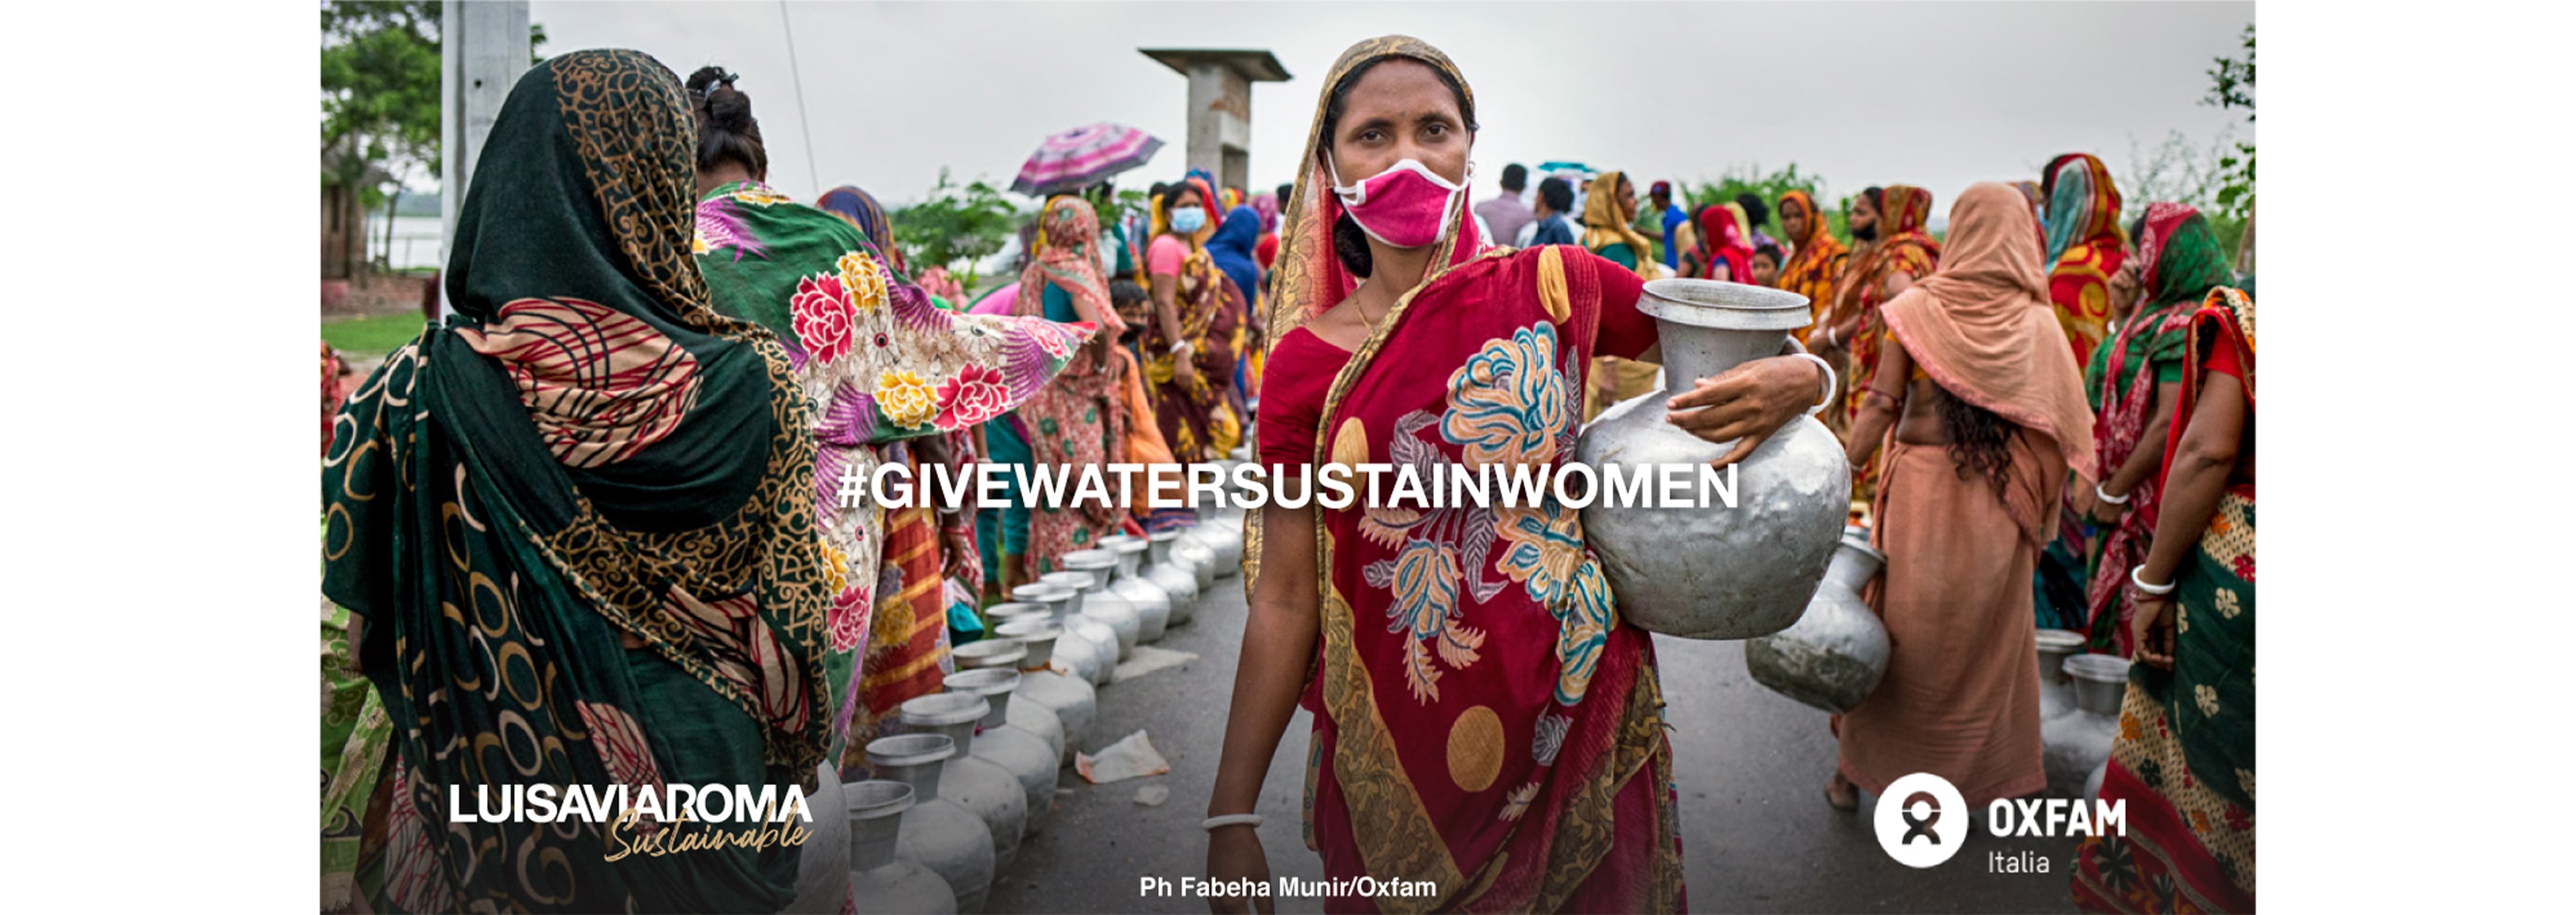 LVRSustainable & Oxfam Italy for Give Water, Sustain Women: The Initiative’s Results and Achievements